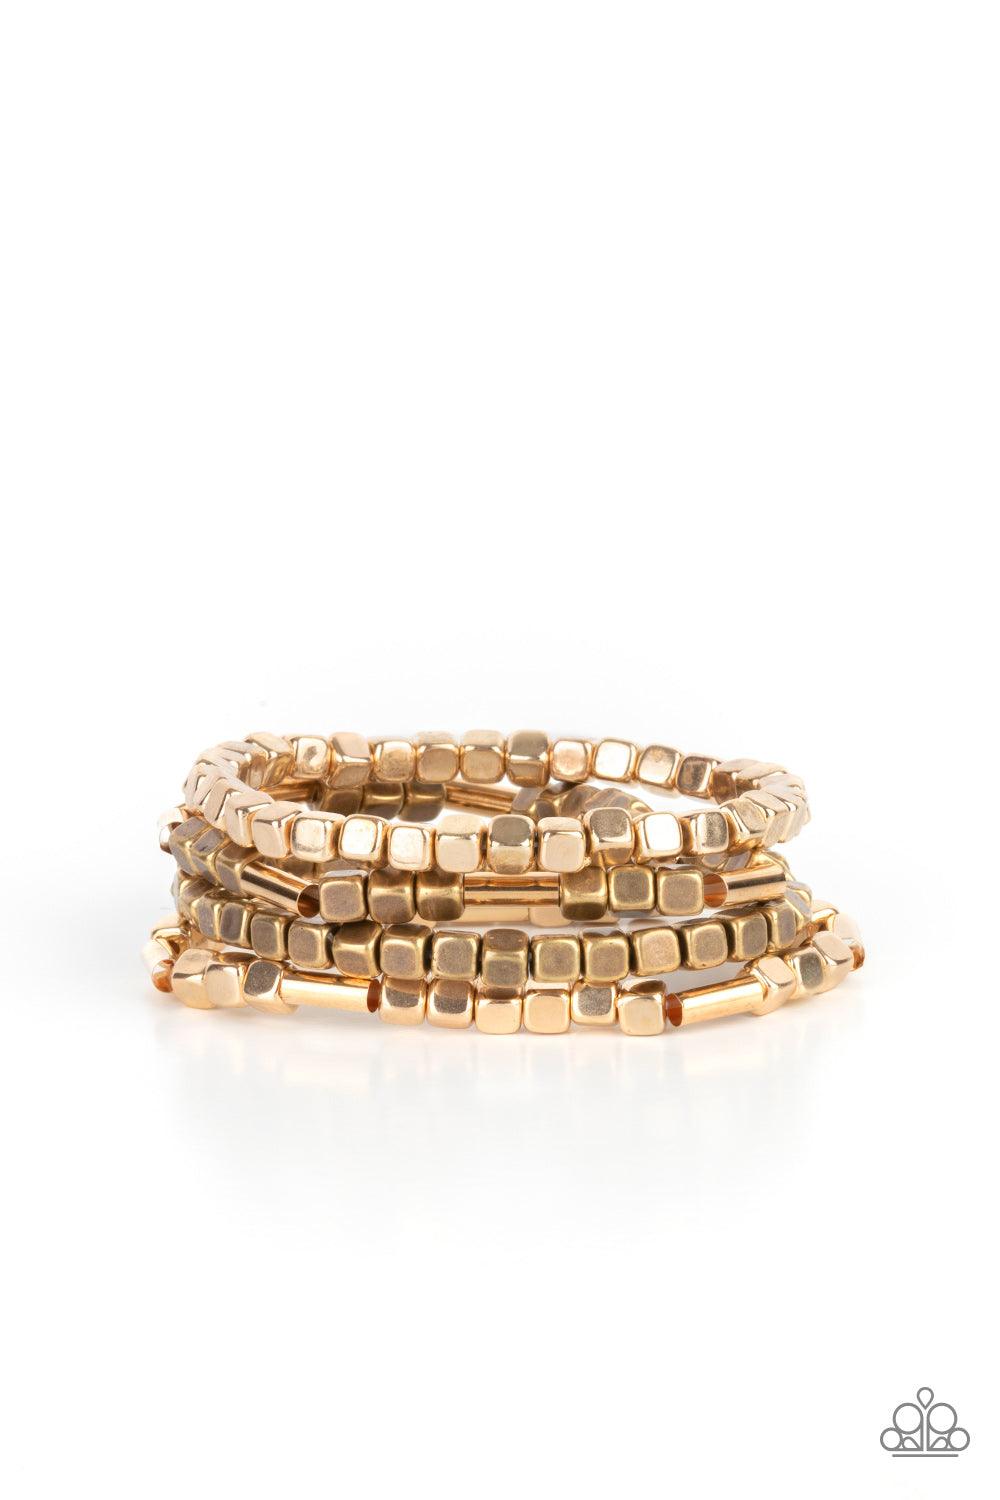 Paparazzi Accessories Metro Materials - Multi Lightweight and flirty, two strands of gold and brass square beads interspersed with gold cylinders, are paired with two strands of gold and brass cubes. The four stretchy bracelets come together to create an